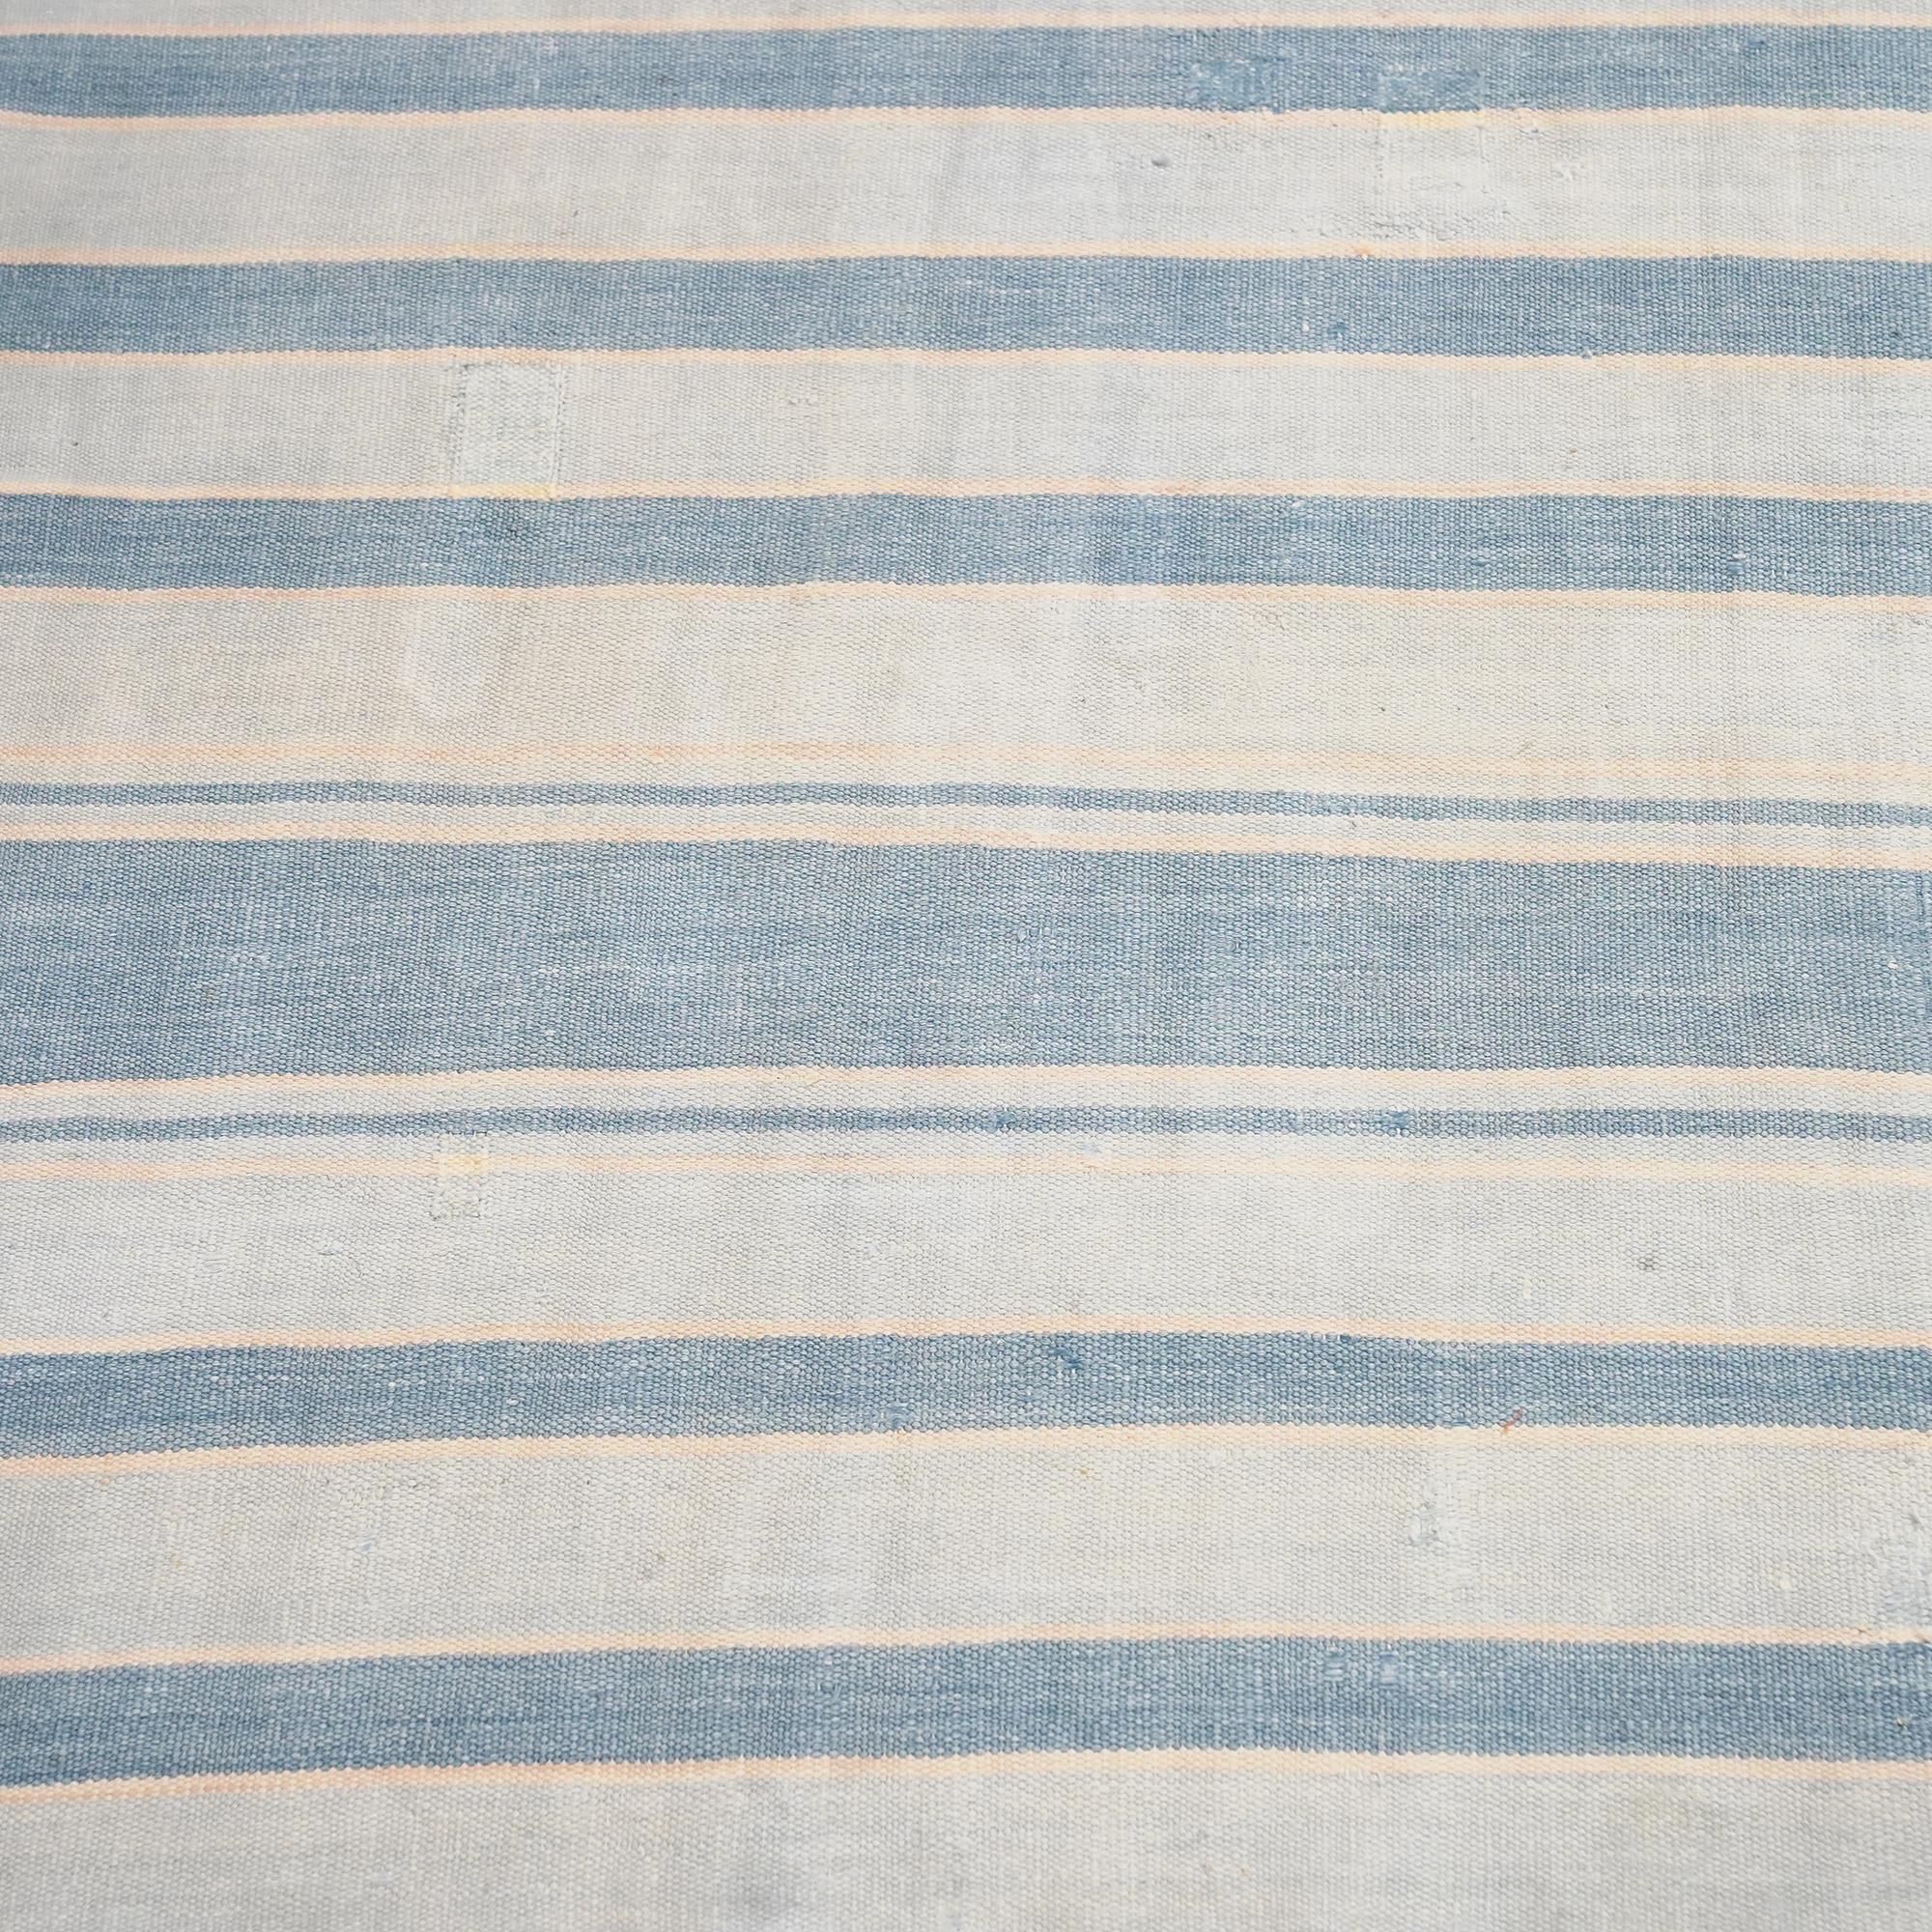 Vintage Dhurrie Rug, with Blue Geometric Stripes, from Rug & Kilim In Good Condition For Sale In Long Island City, NY